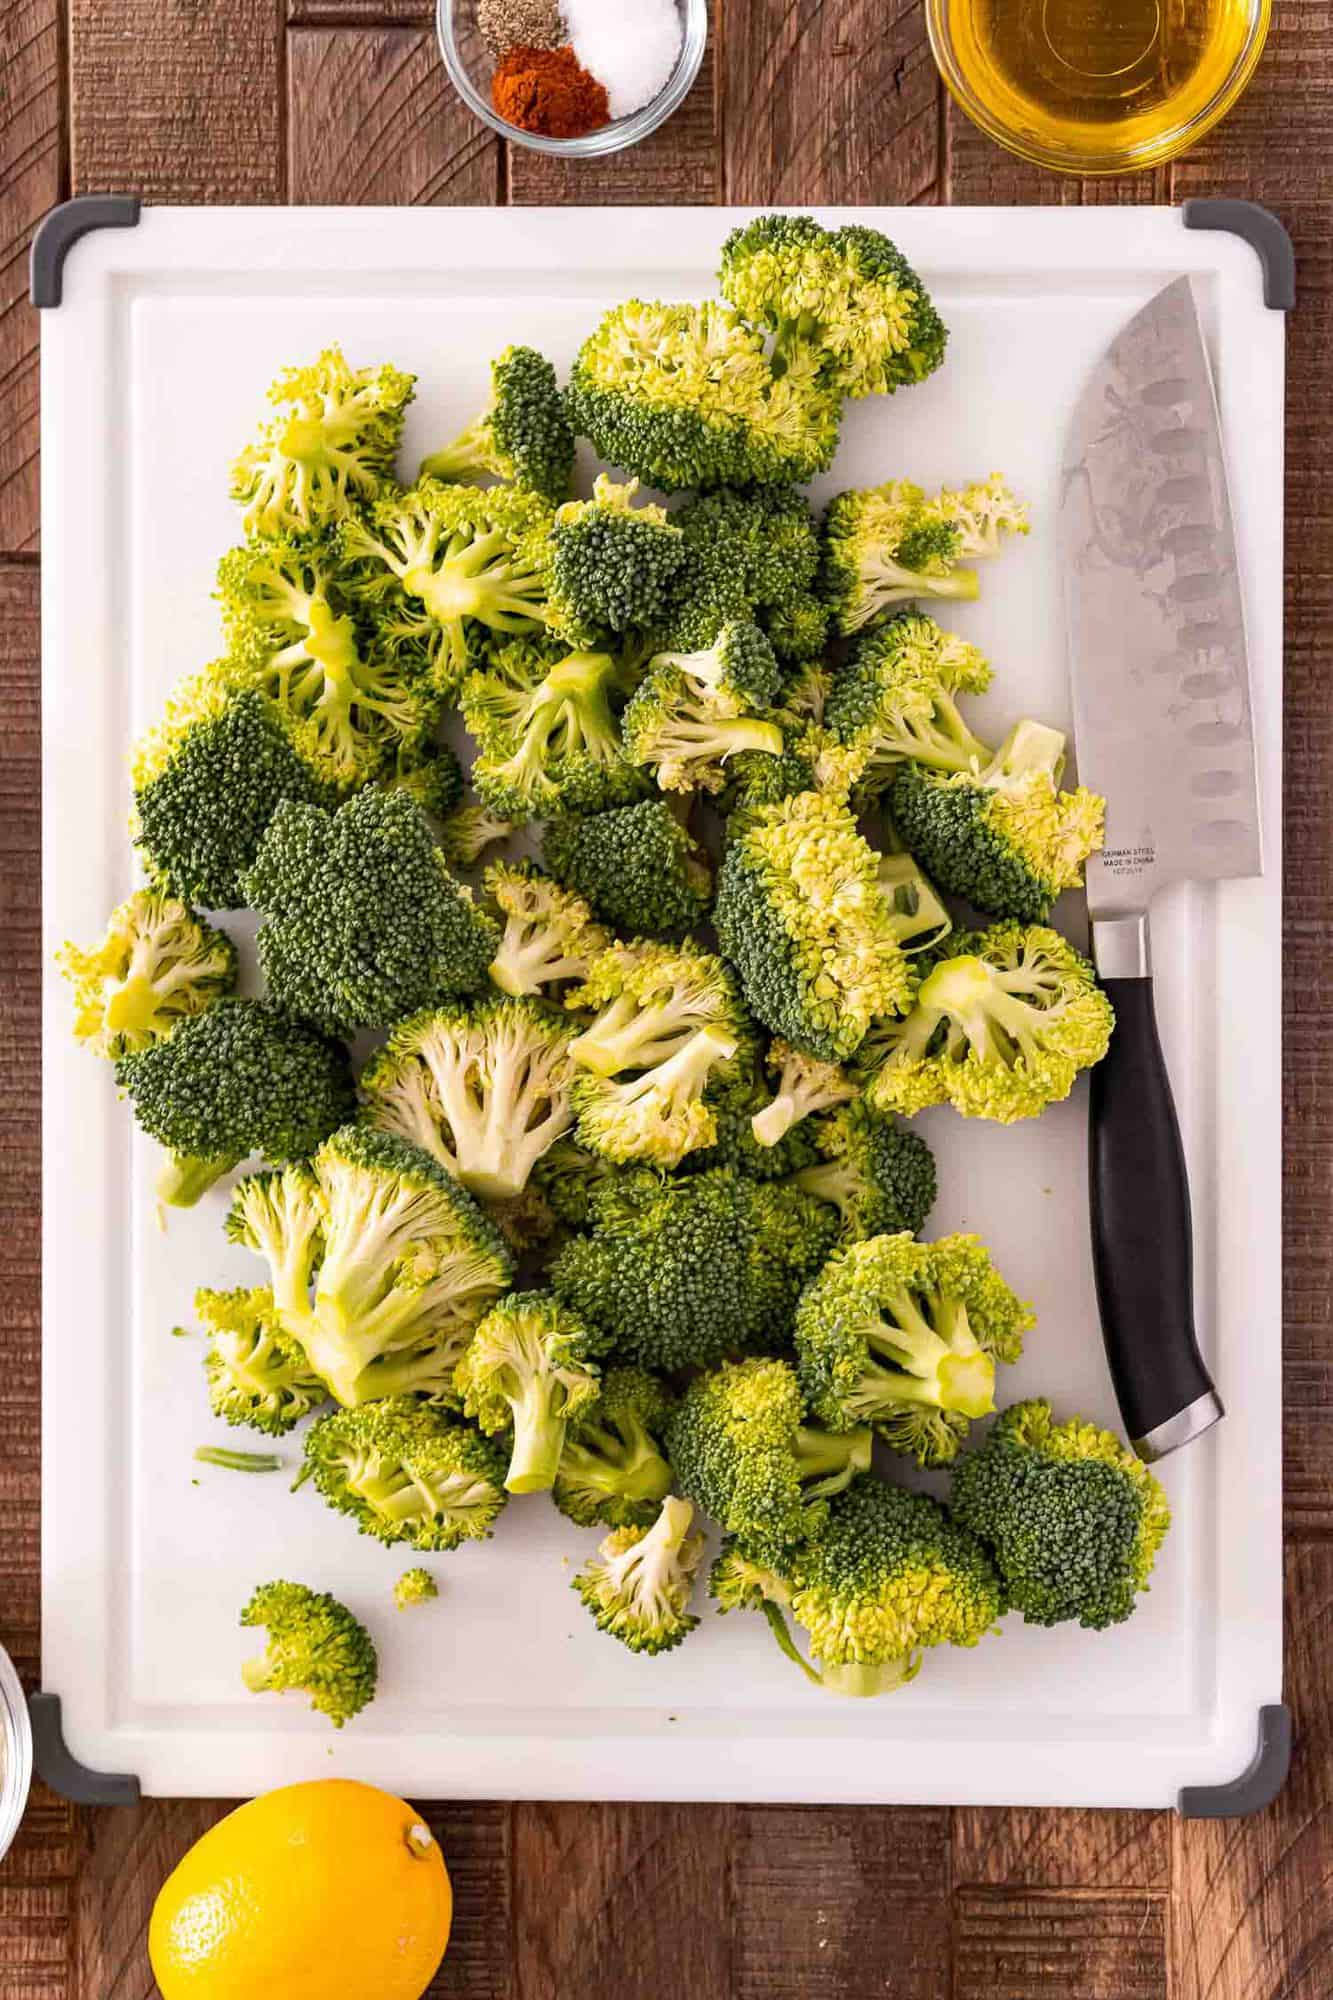 Broccoli florets and knife on white cutting board.